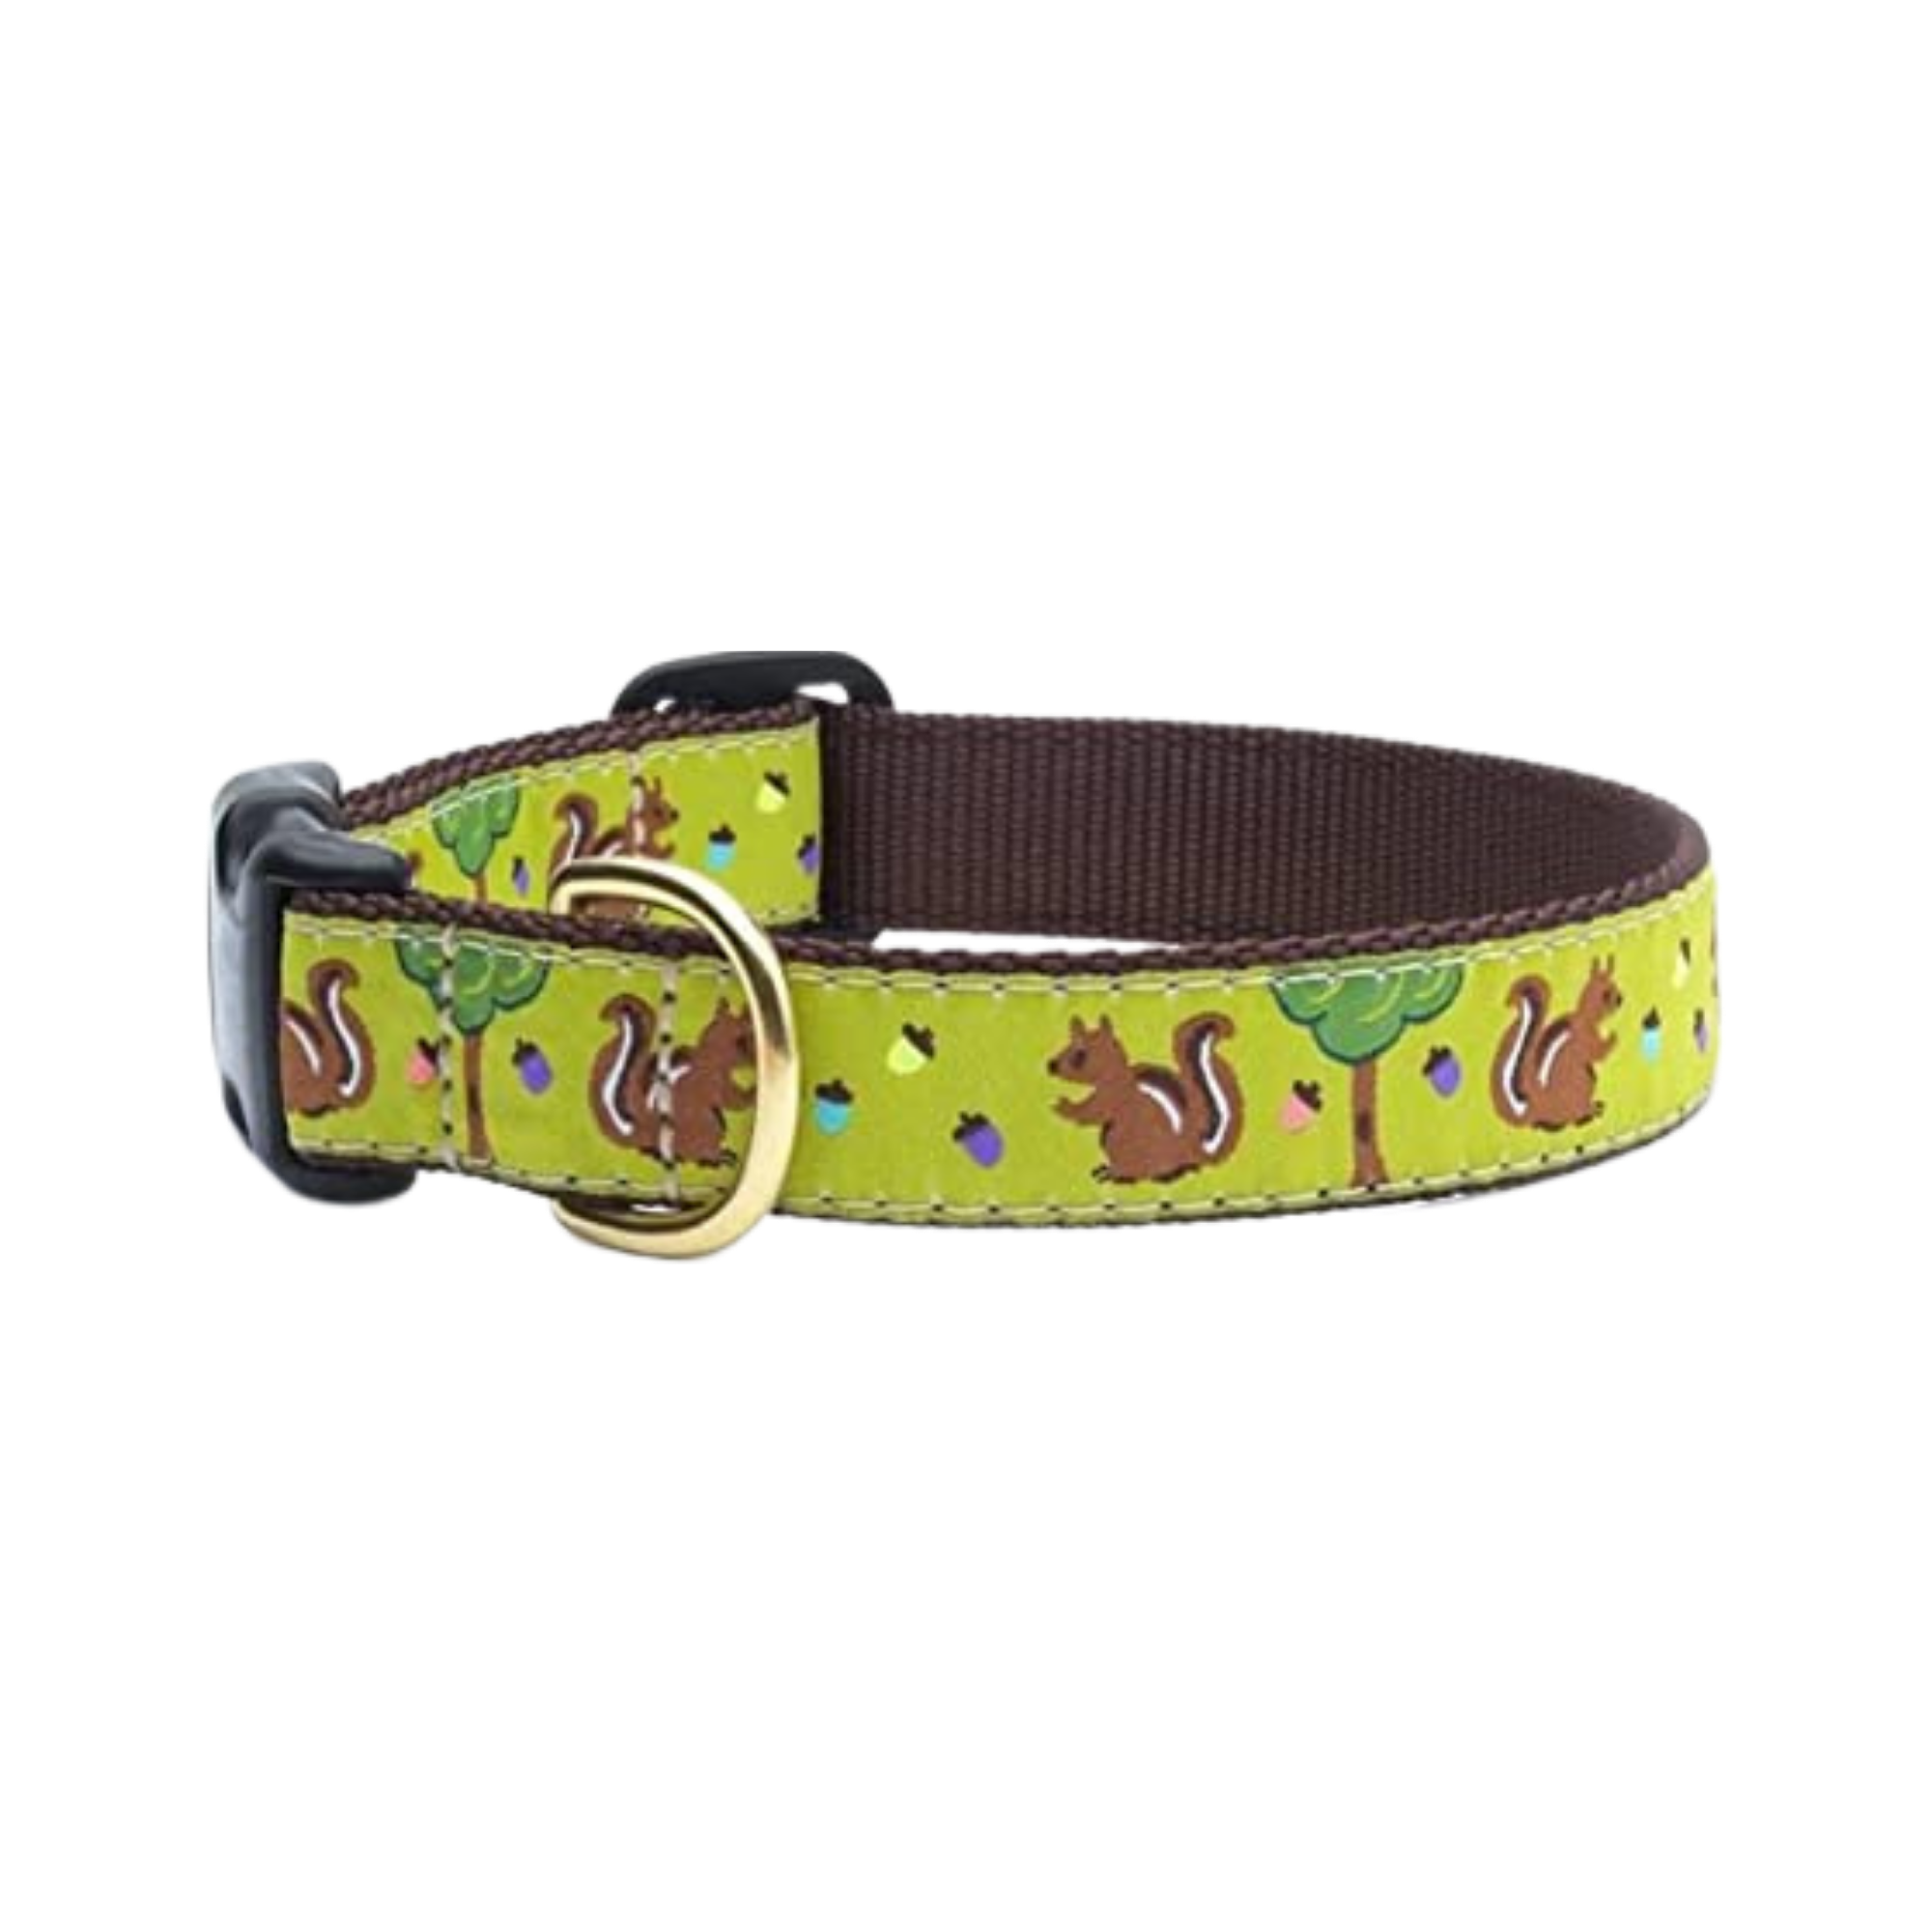 Up Country Nuts Dog Collar - Mutts & Co.